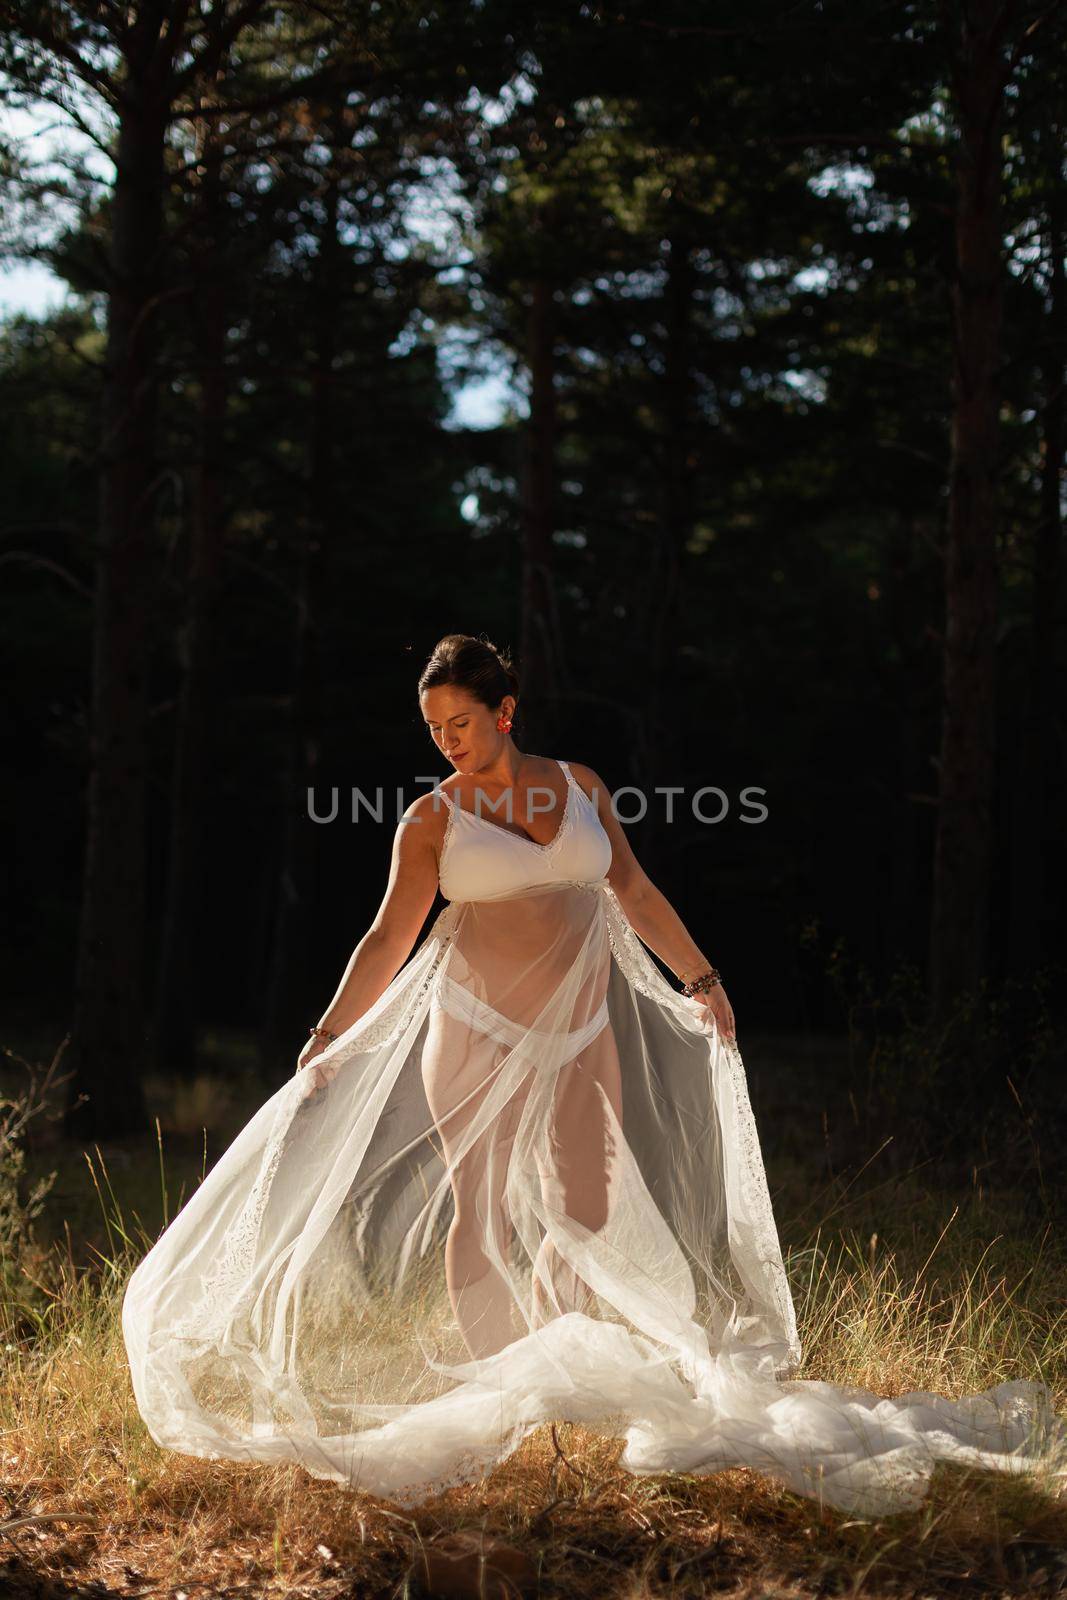 A pregnant woman poses holding part of her wedding dress with her hands by stockrojoverdeyazul